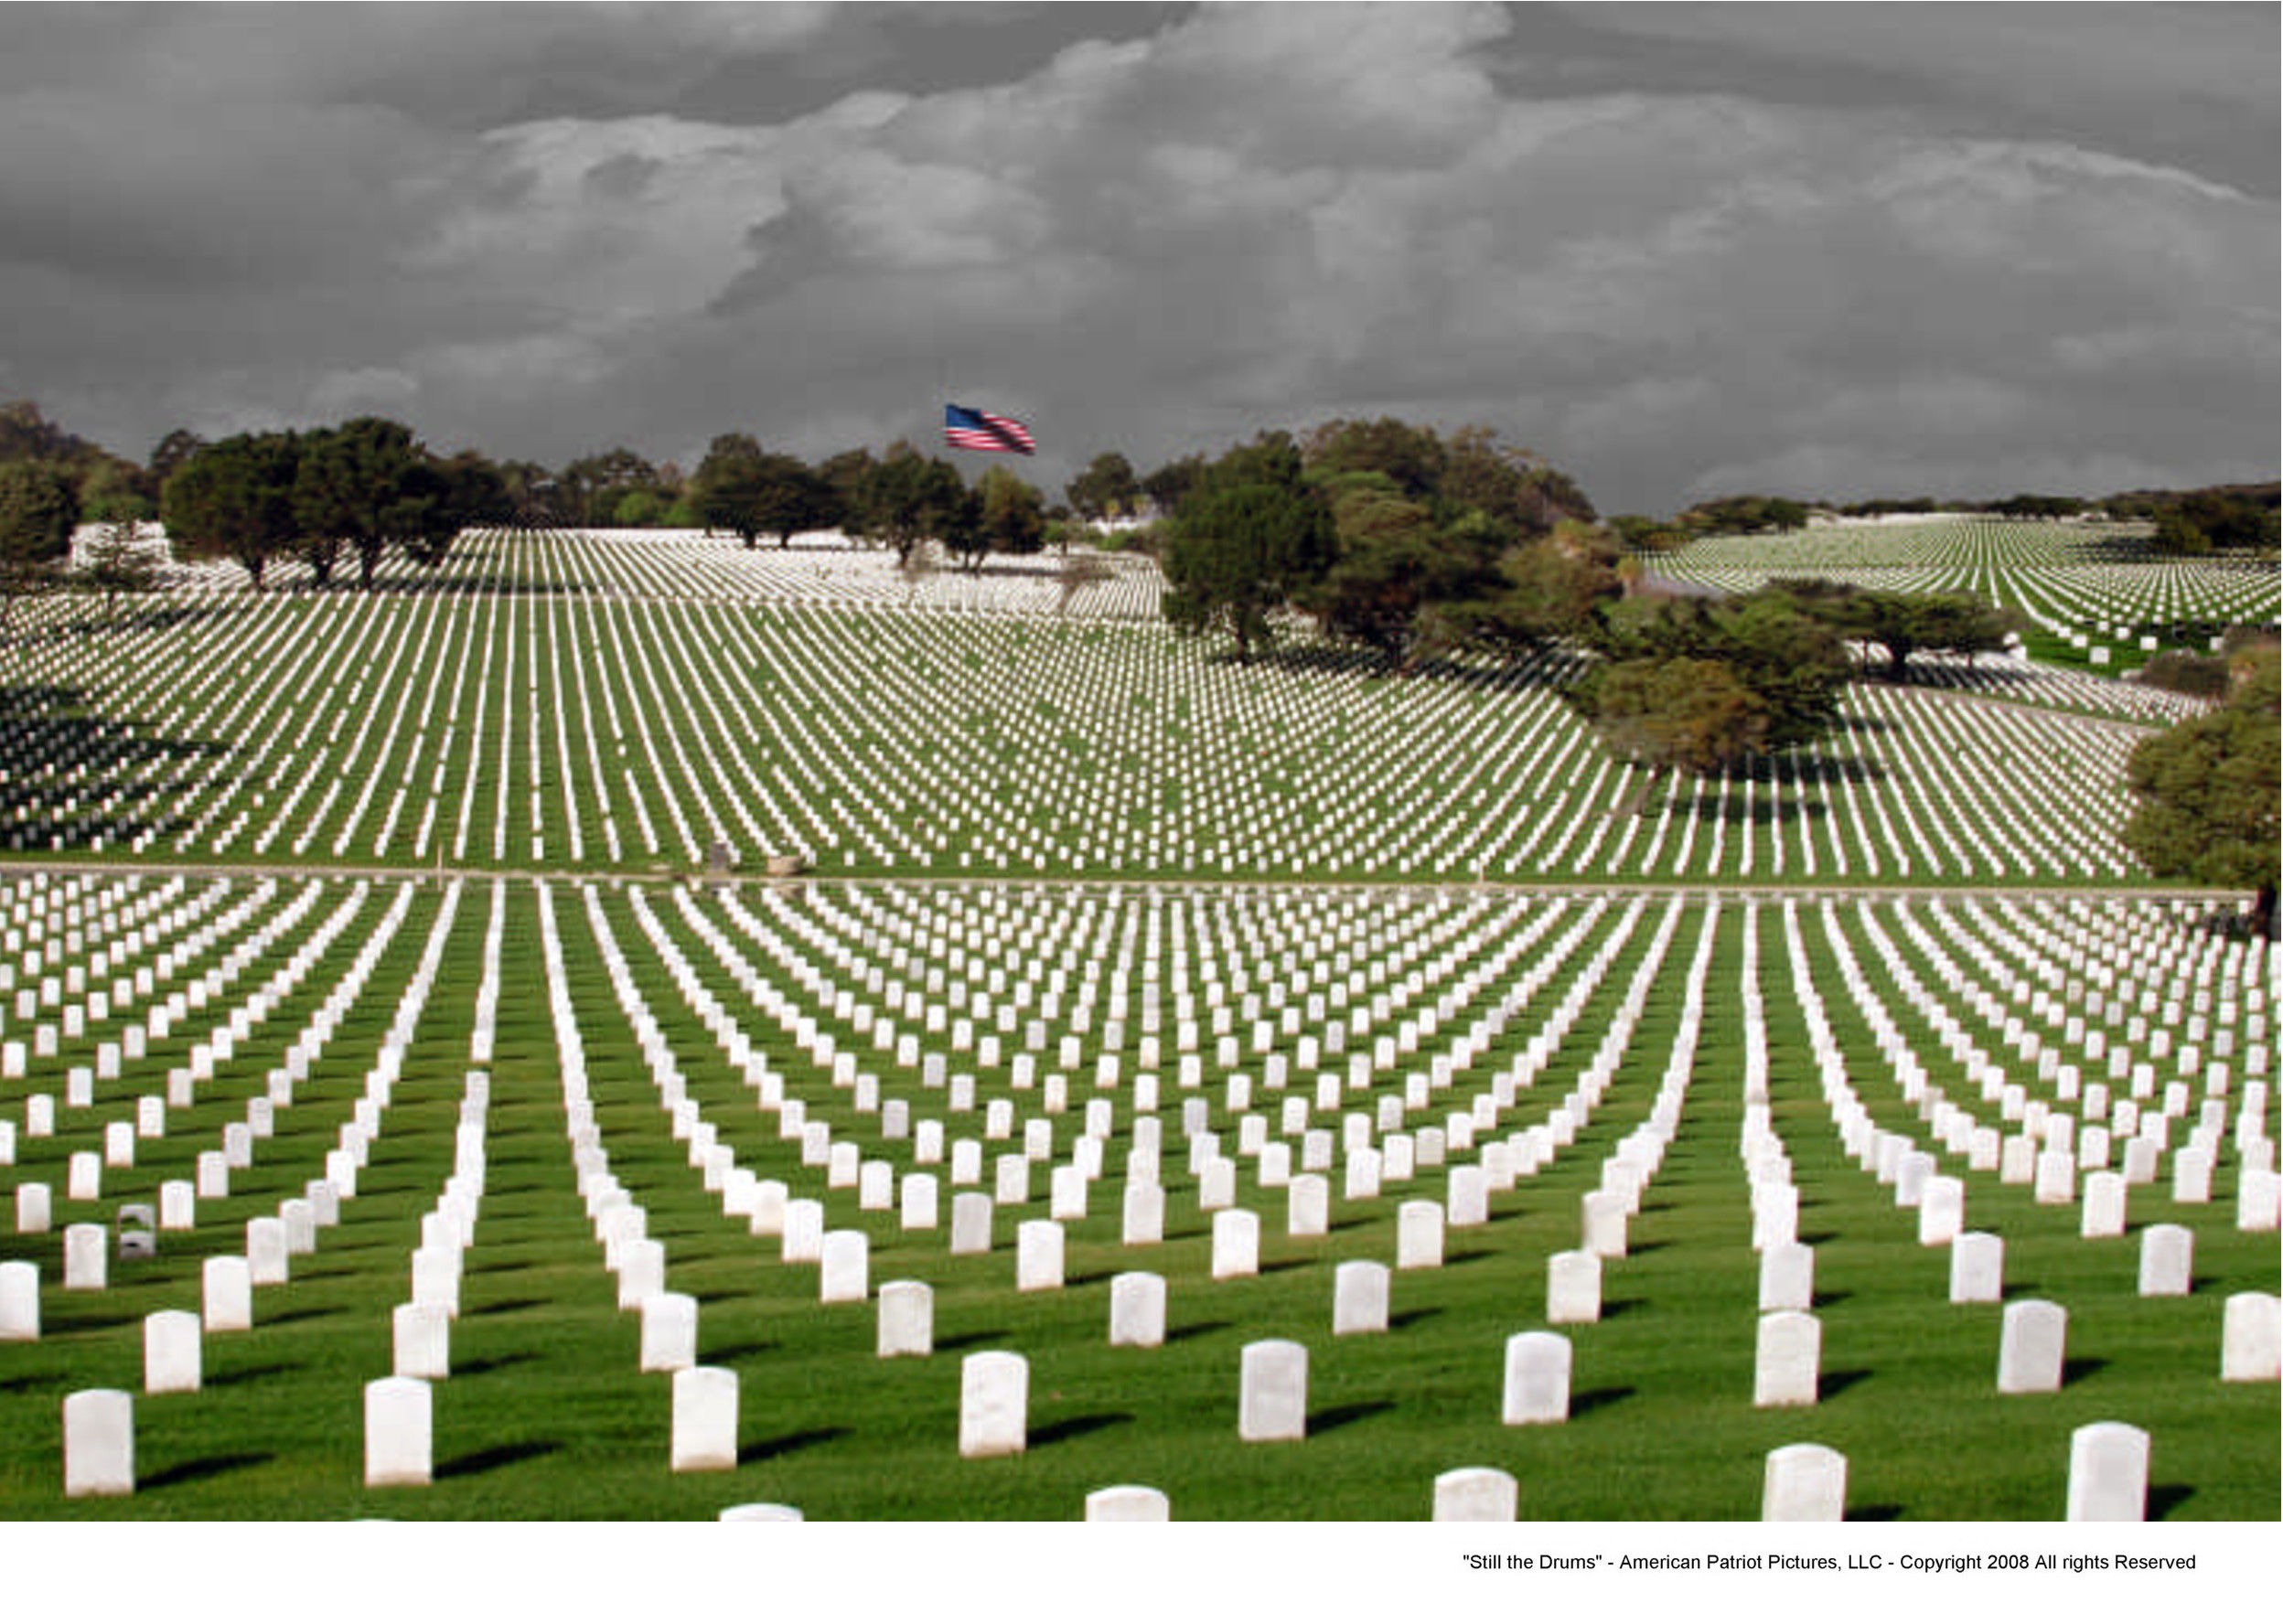 How can we better honor our vets on Memorial Day? - Fabius Maximus website